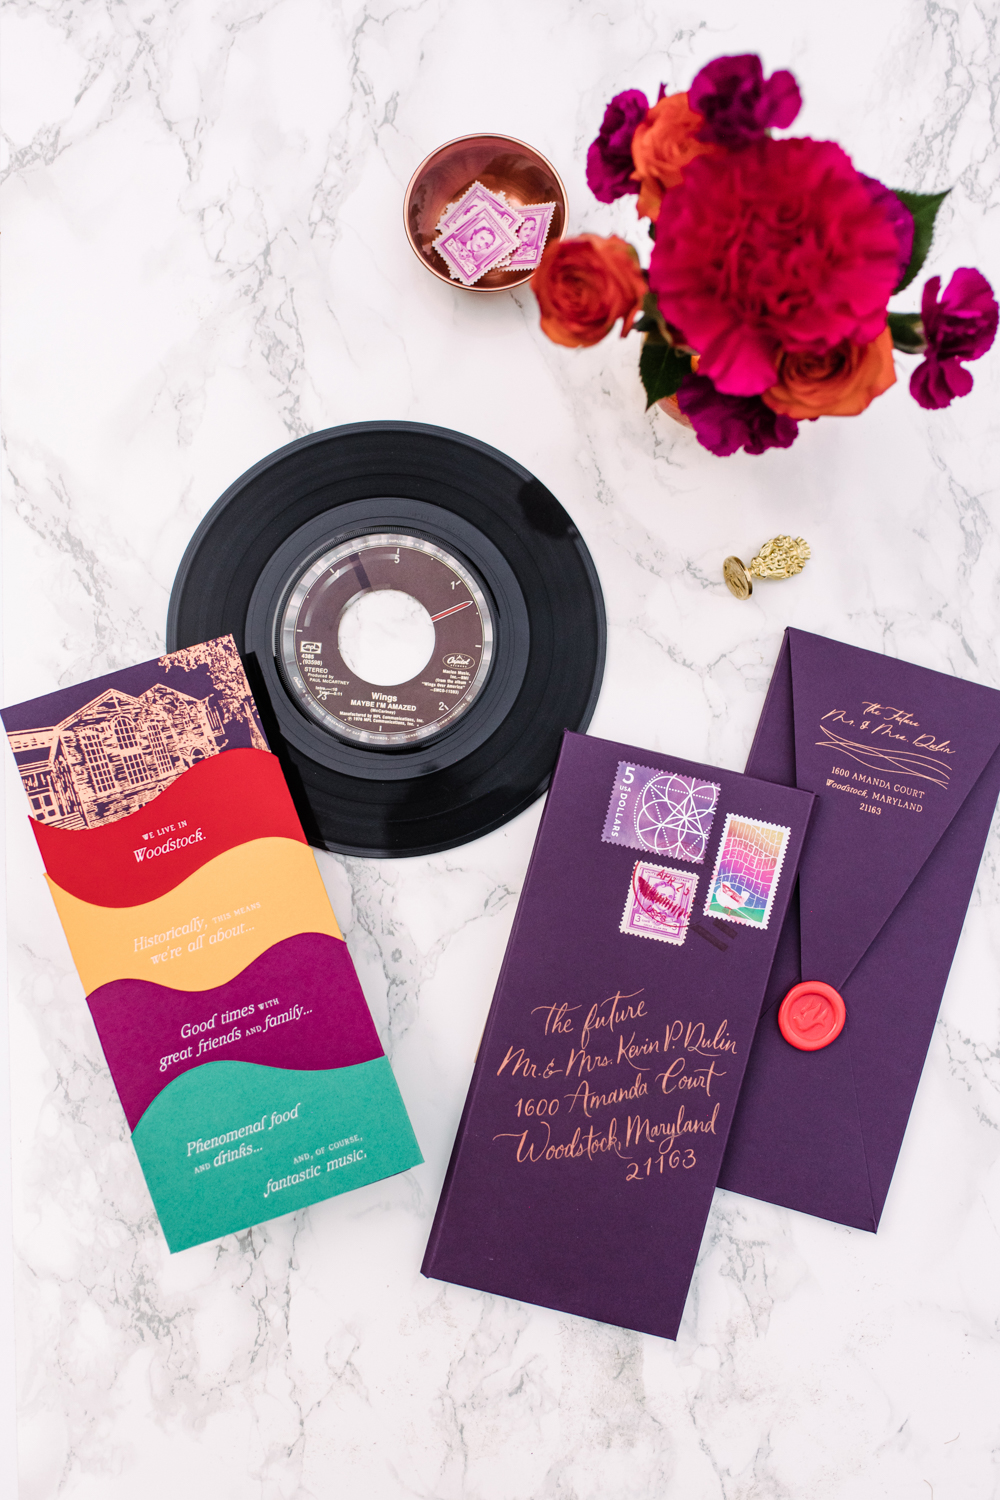 FPTQ invitation save the date suite designer for baltimore wedding with record